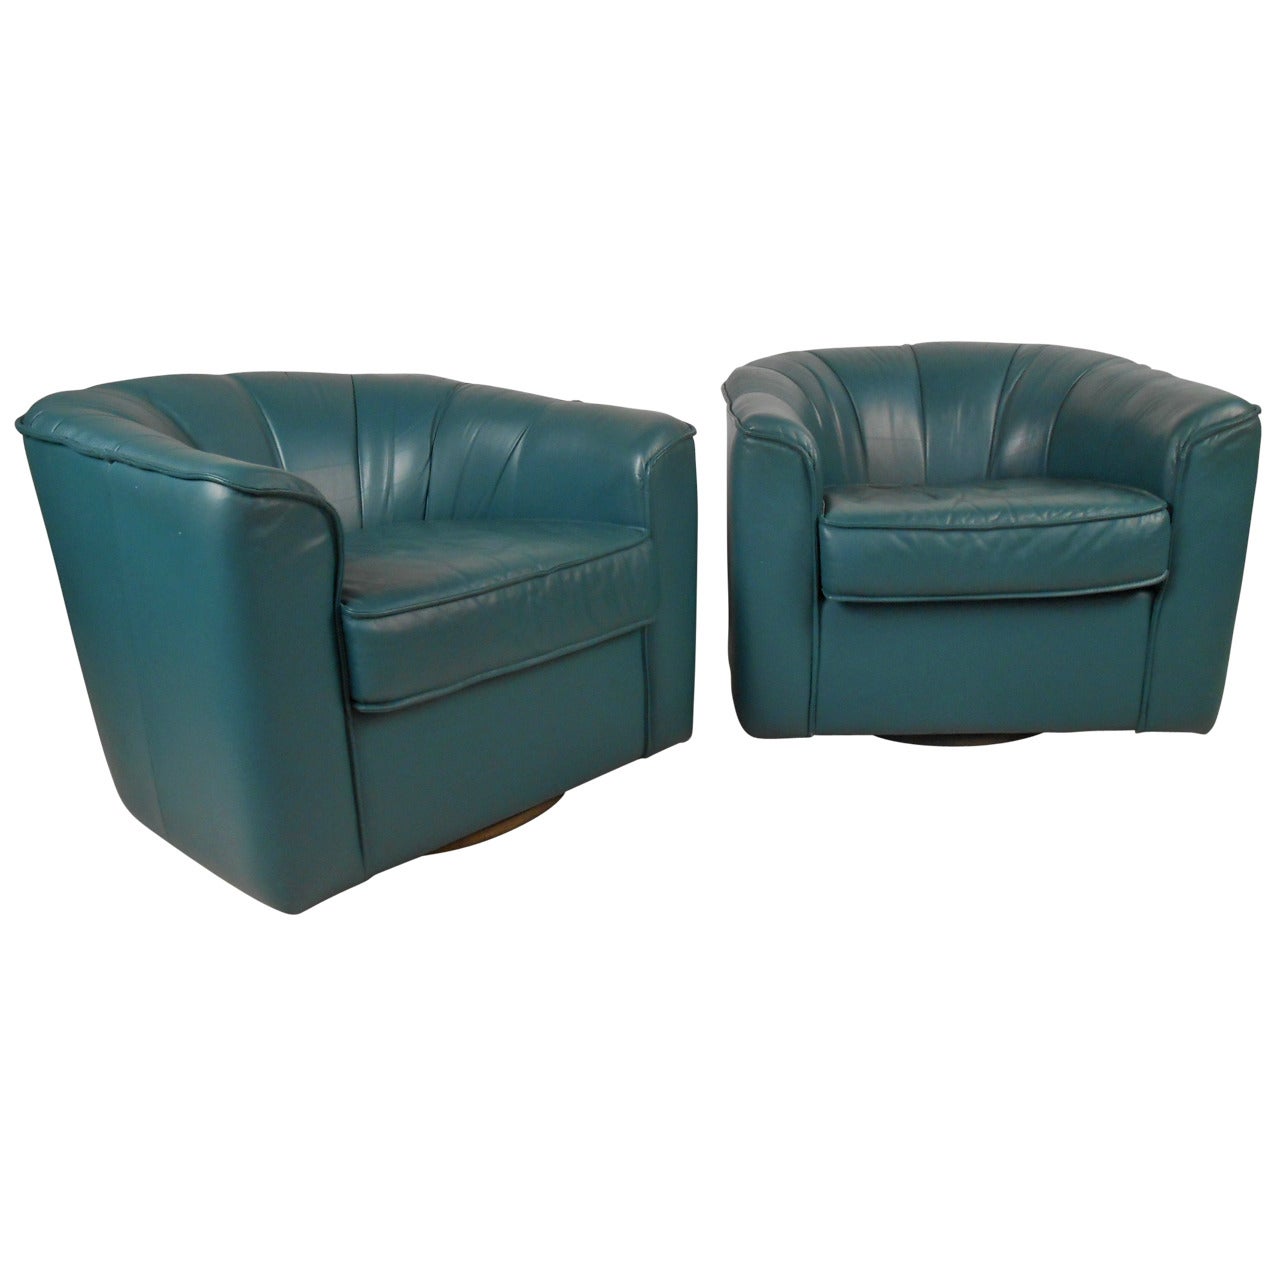 Pair of Contemporary Modern Swivel Club Chairs